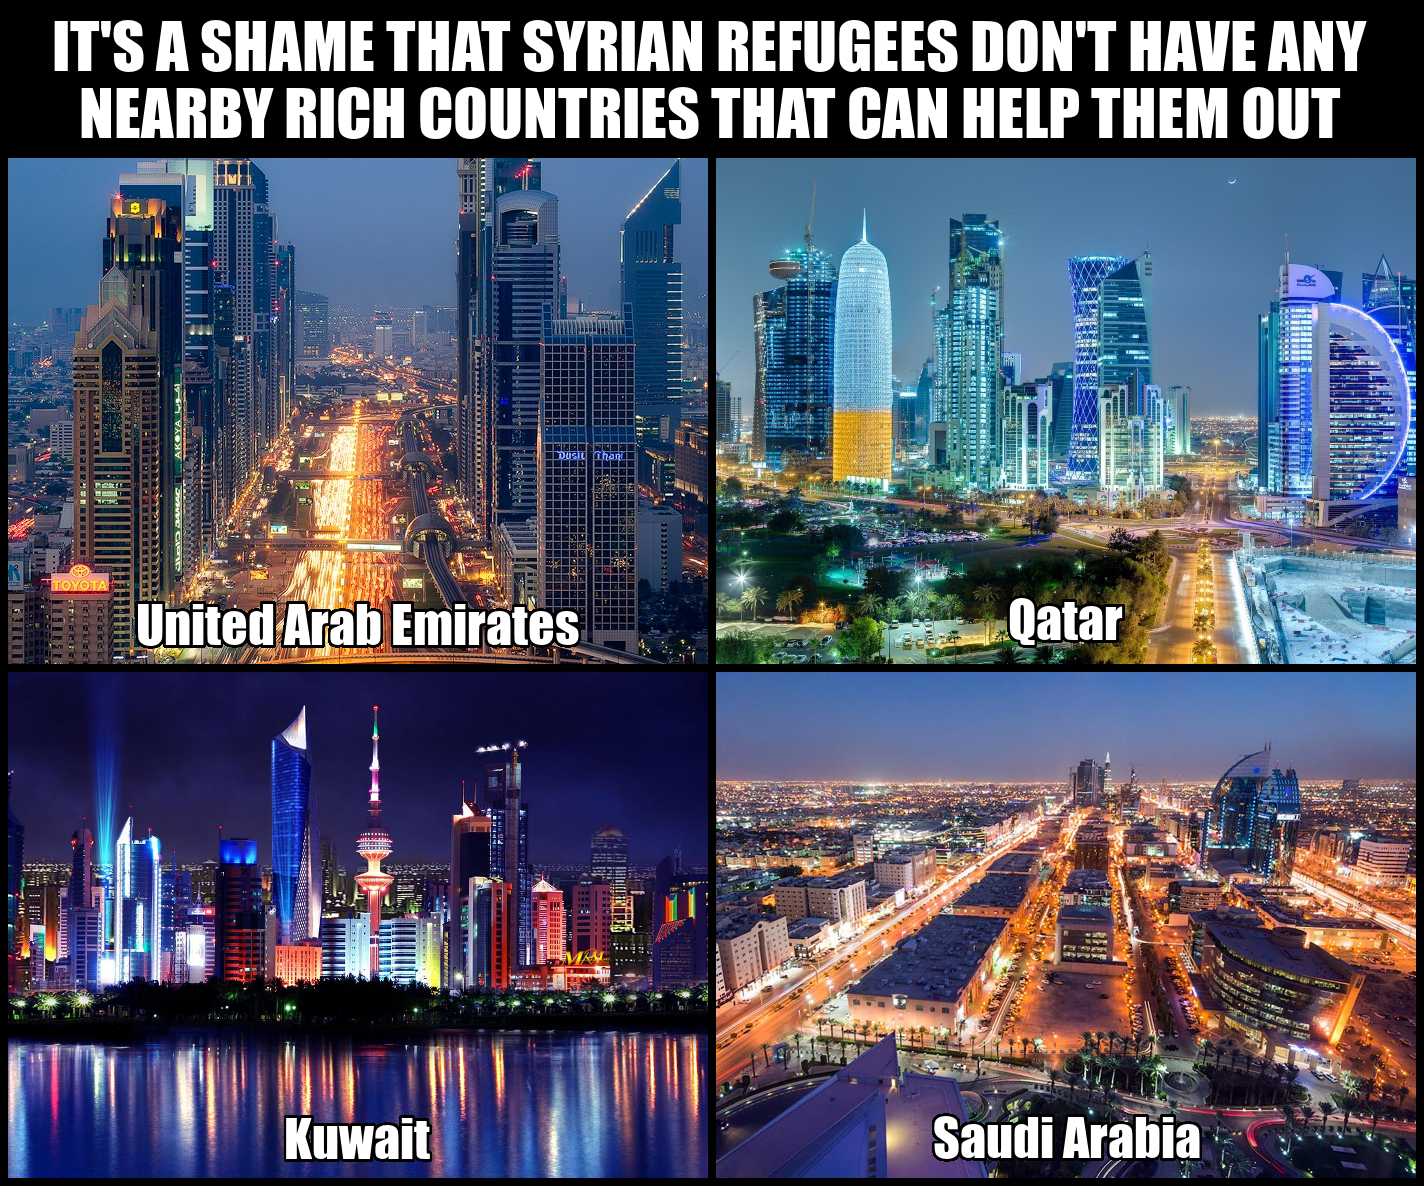 They could go to the United Arab Emirates, Qatar, Kuwait, and Saudi Arabia. They're really wealthy countries.